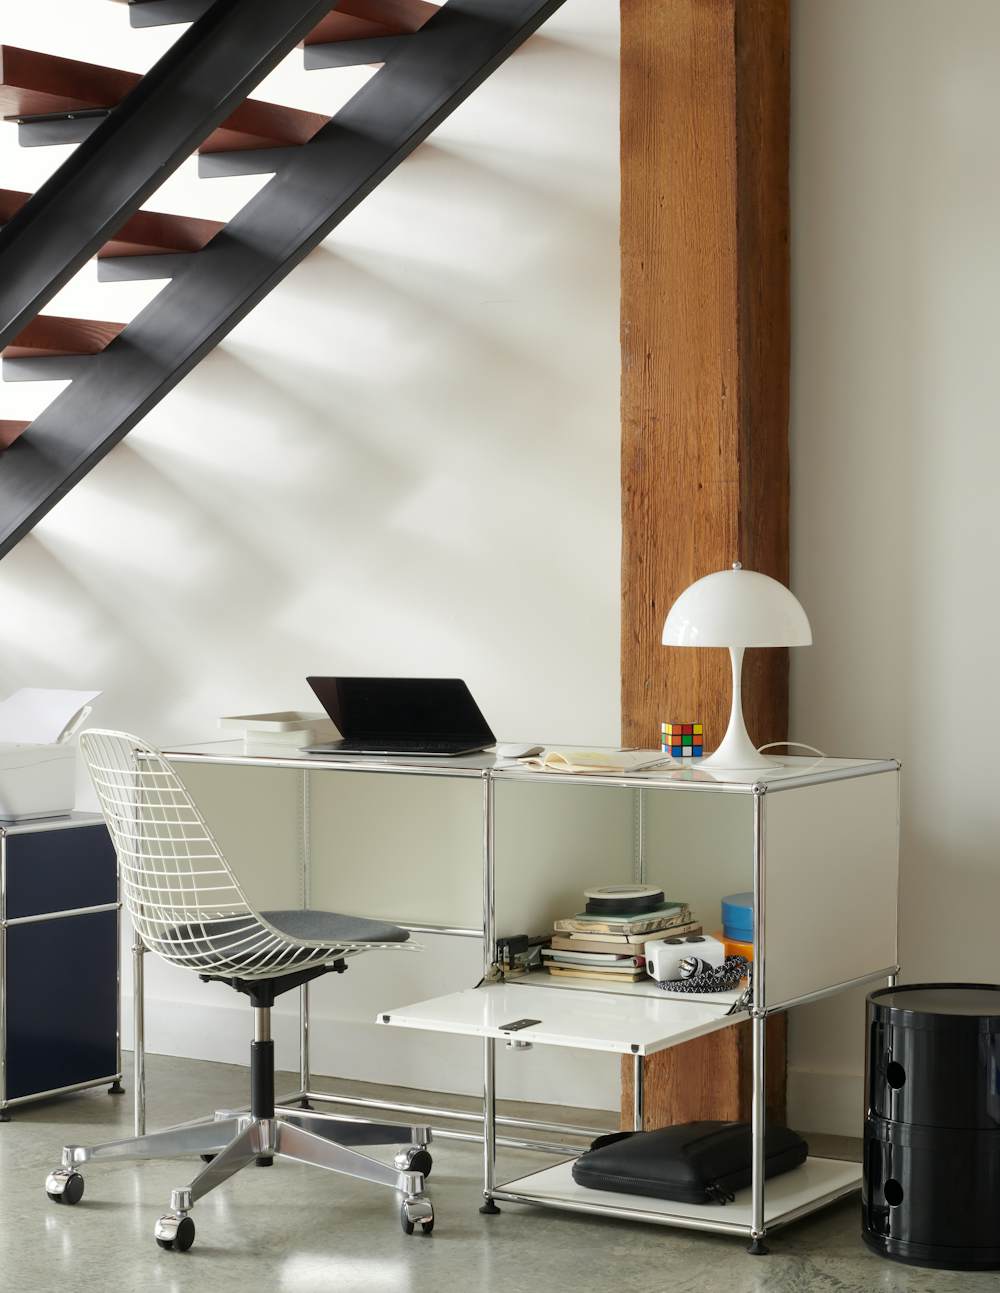 Eames Wire Task Side Chair, USM Haller Desk 1, Panthella Table Lamp and Componibili Storage Unit in a home office setting